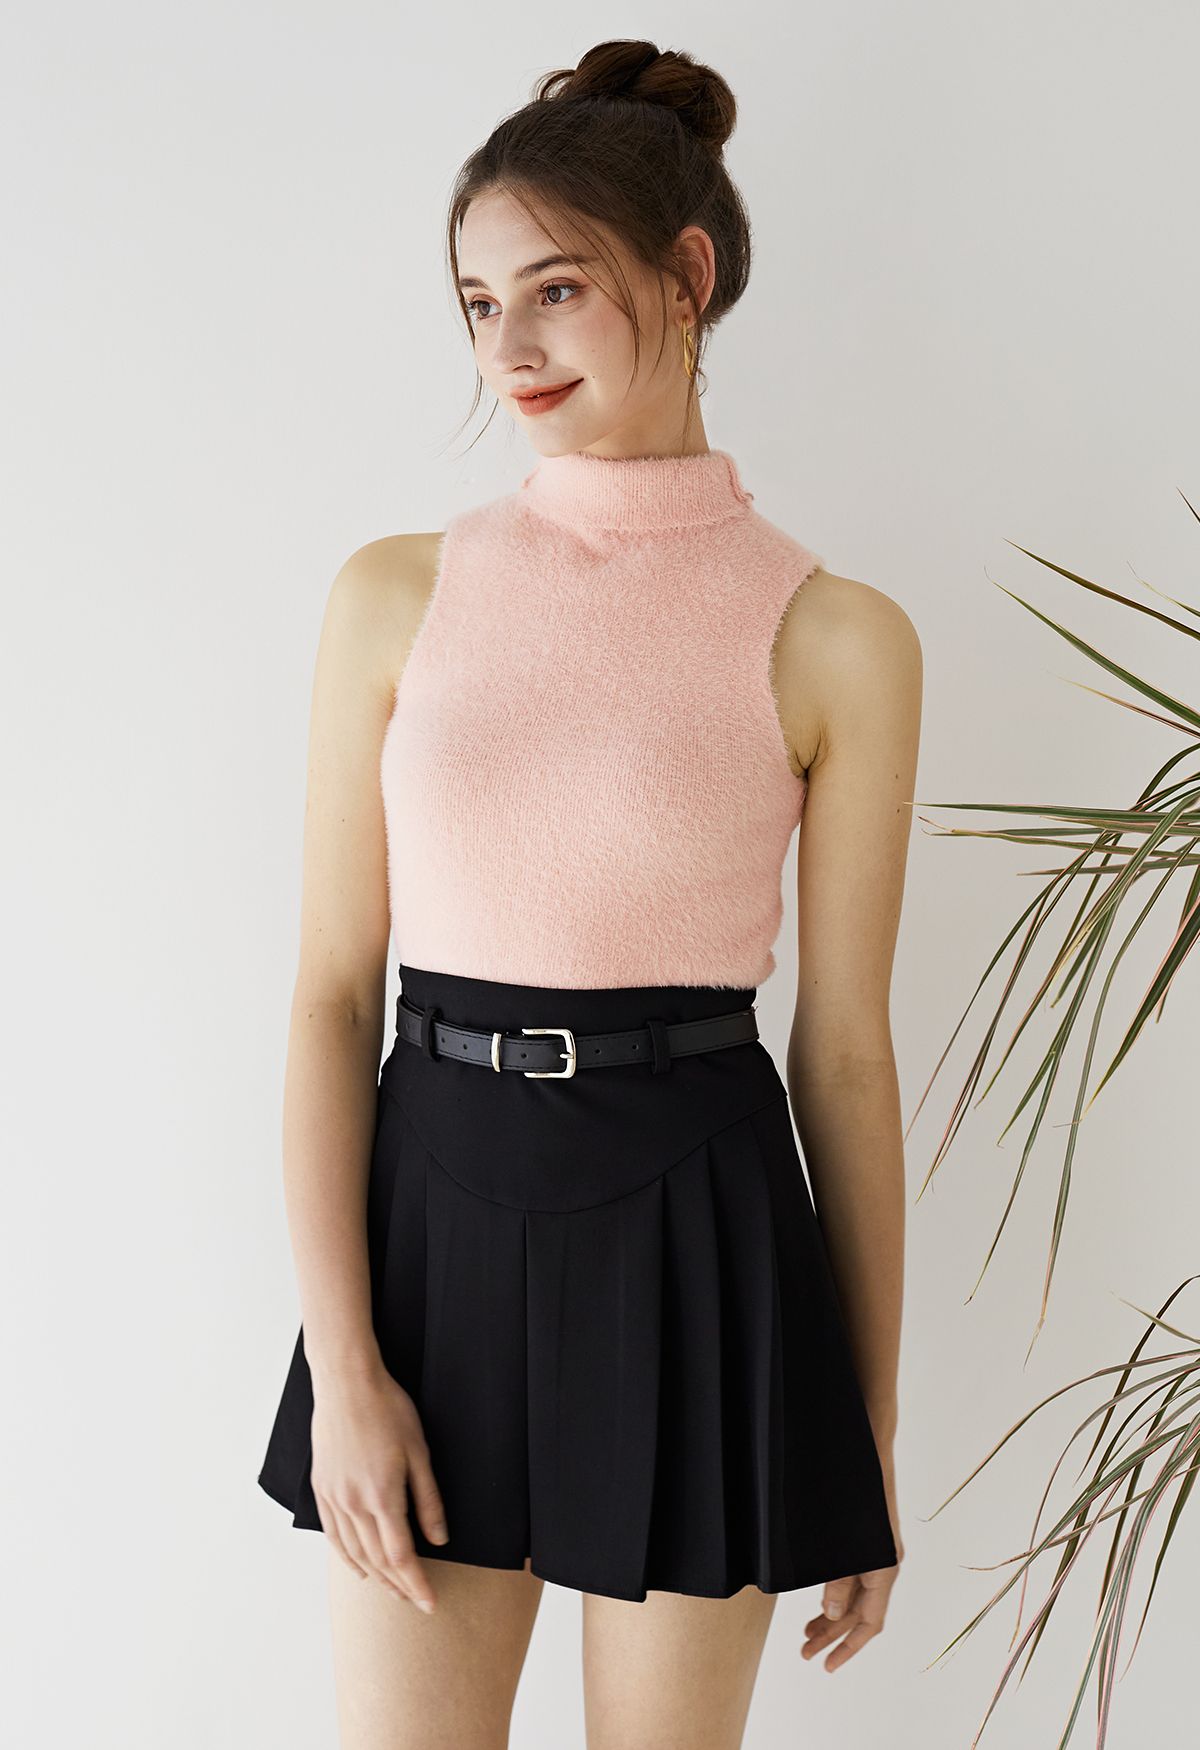 High Neck Fuzzy Knit Tank Top in Pink - Retro, Indie and Unique Fashion